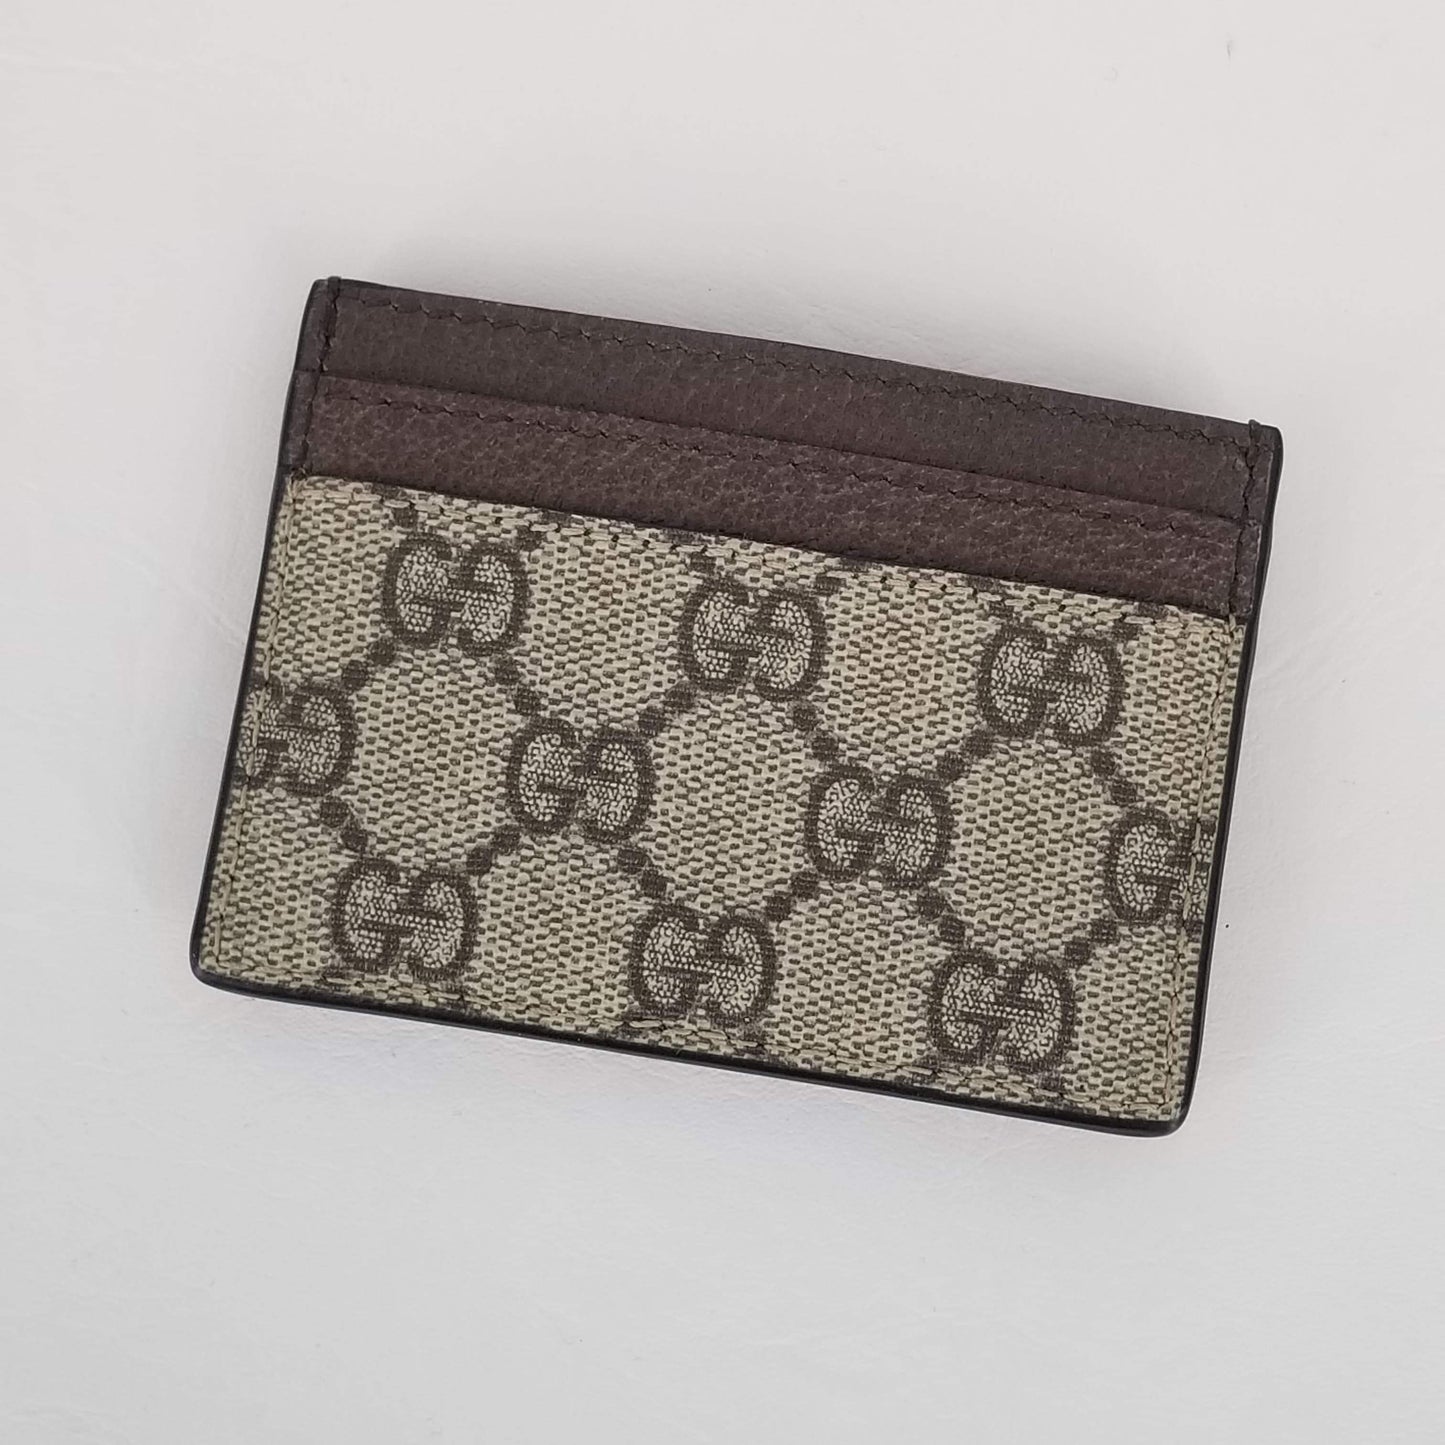 Authentic Gucci Ophidia GG Web Card Holder